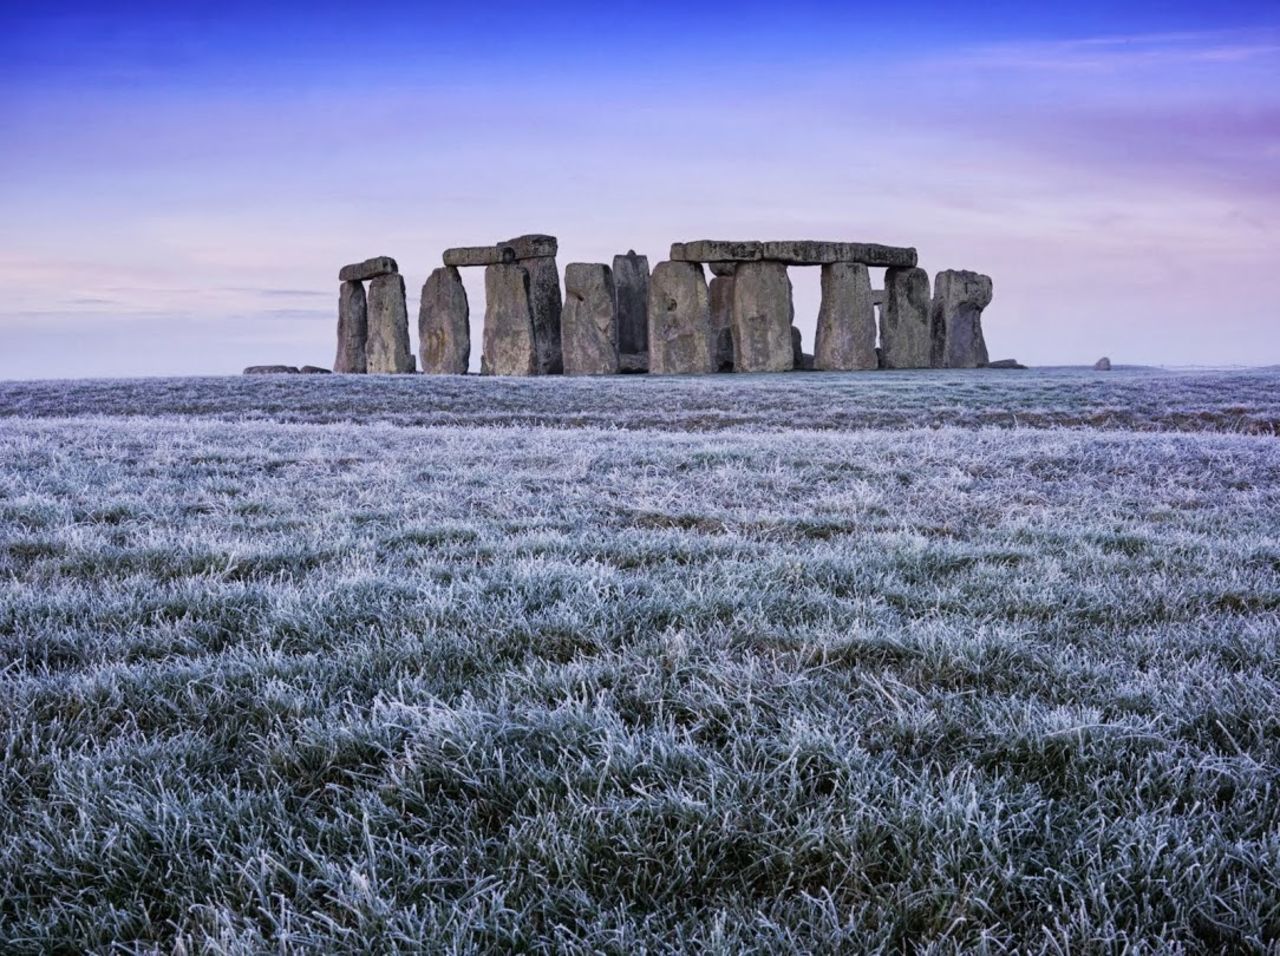 Stonehenge, which is in the west of England, is one of the world's most famous prehistoric monuments.